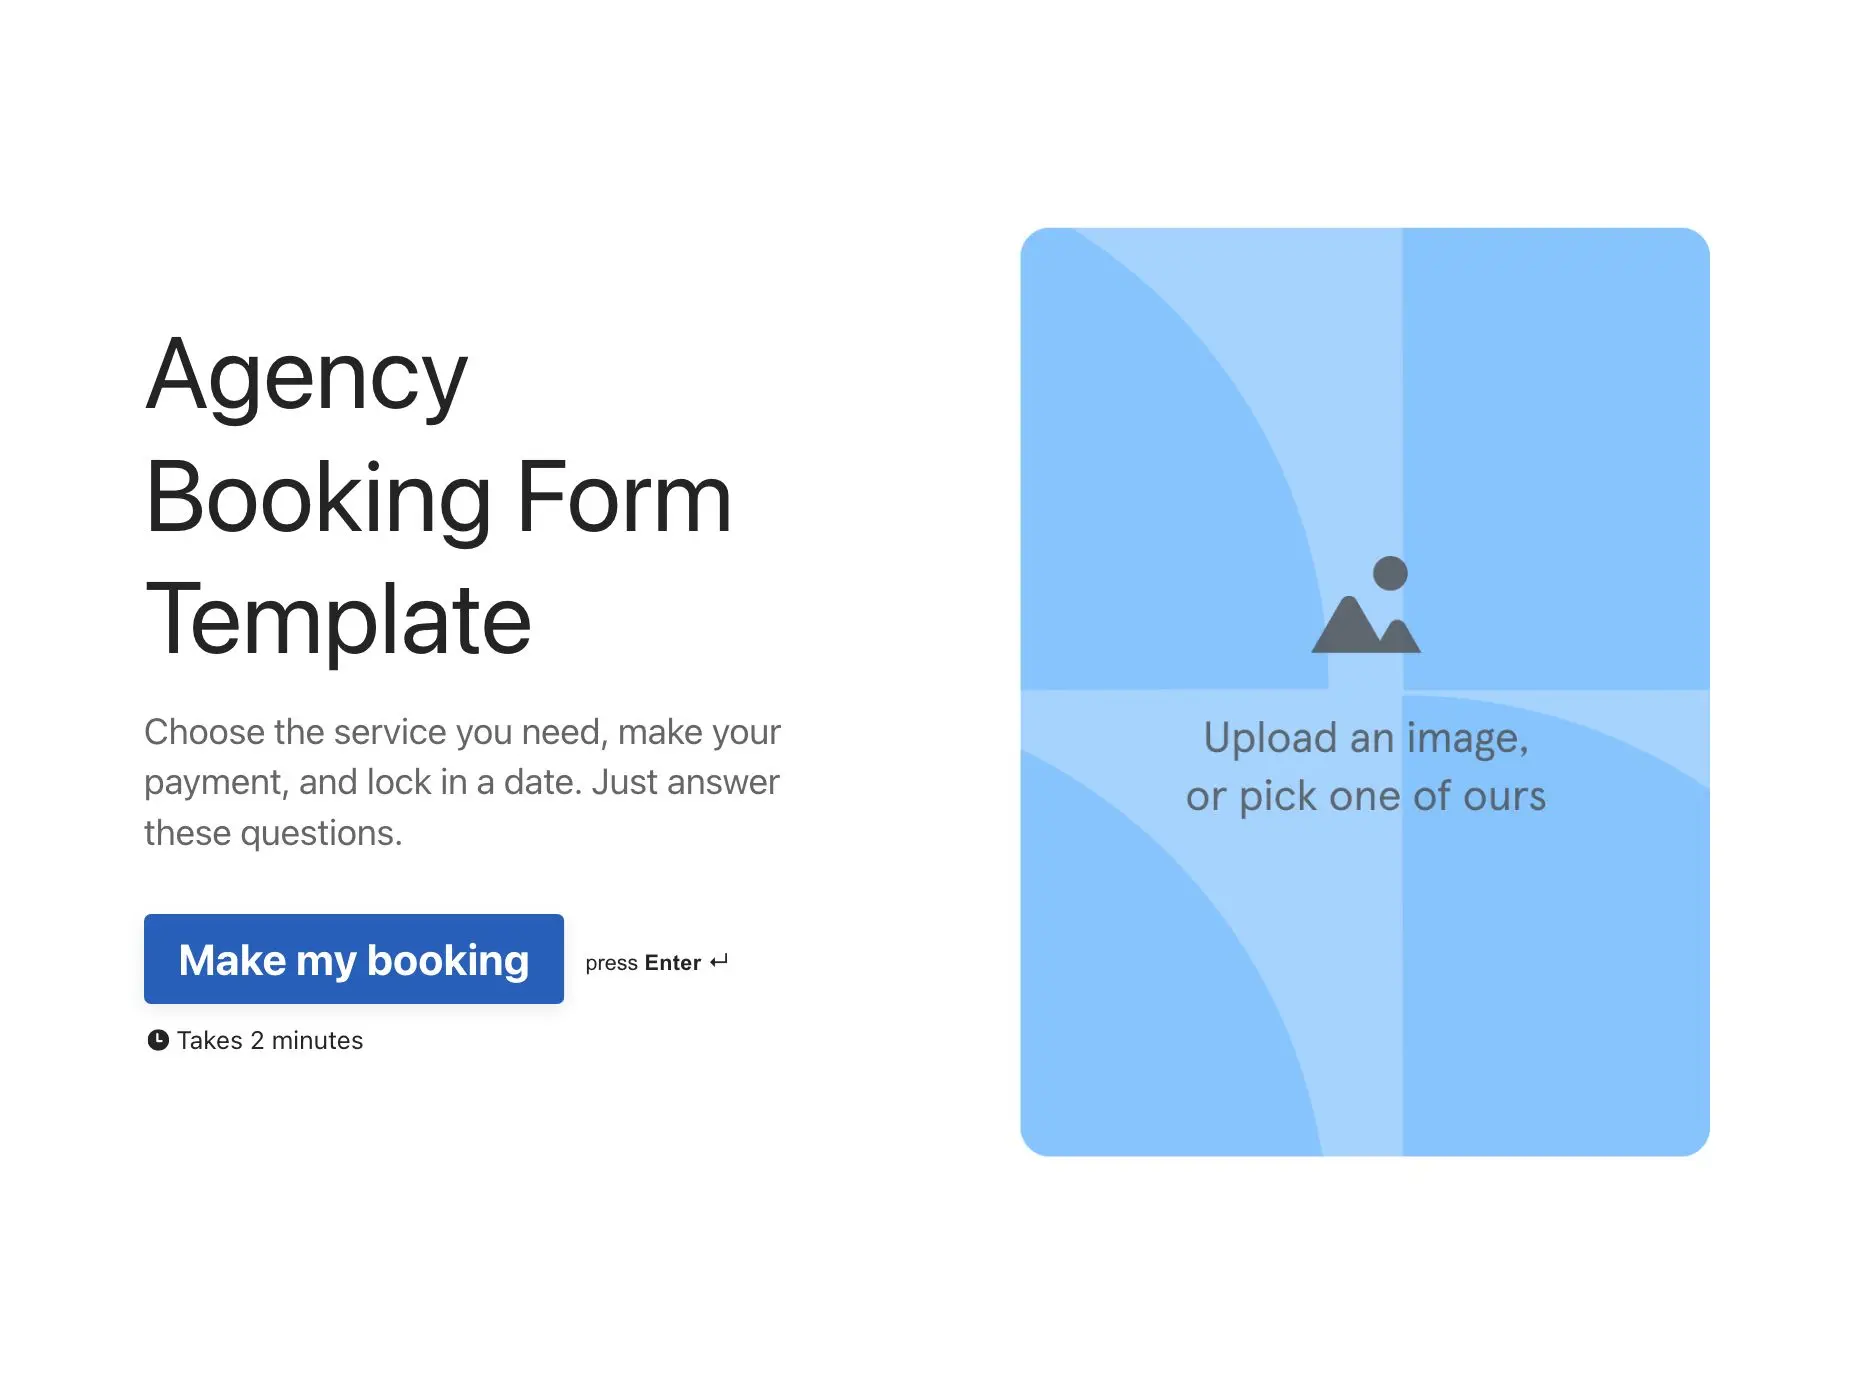 Agency booking form template Hero